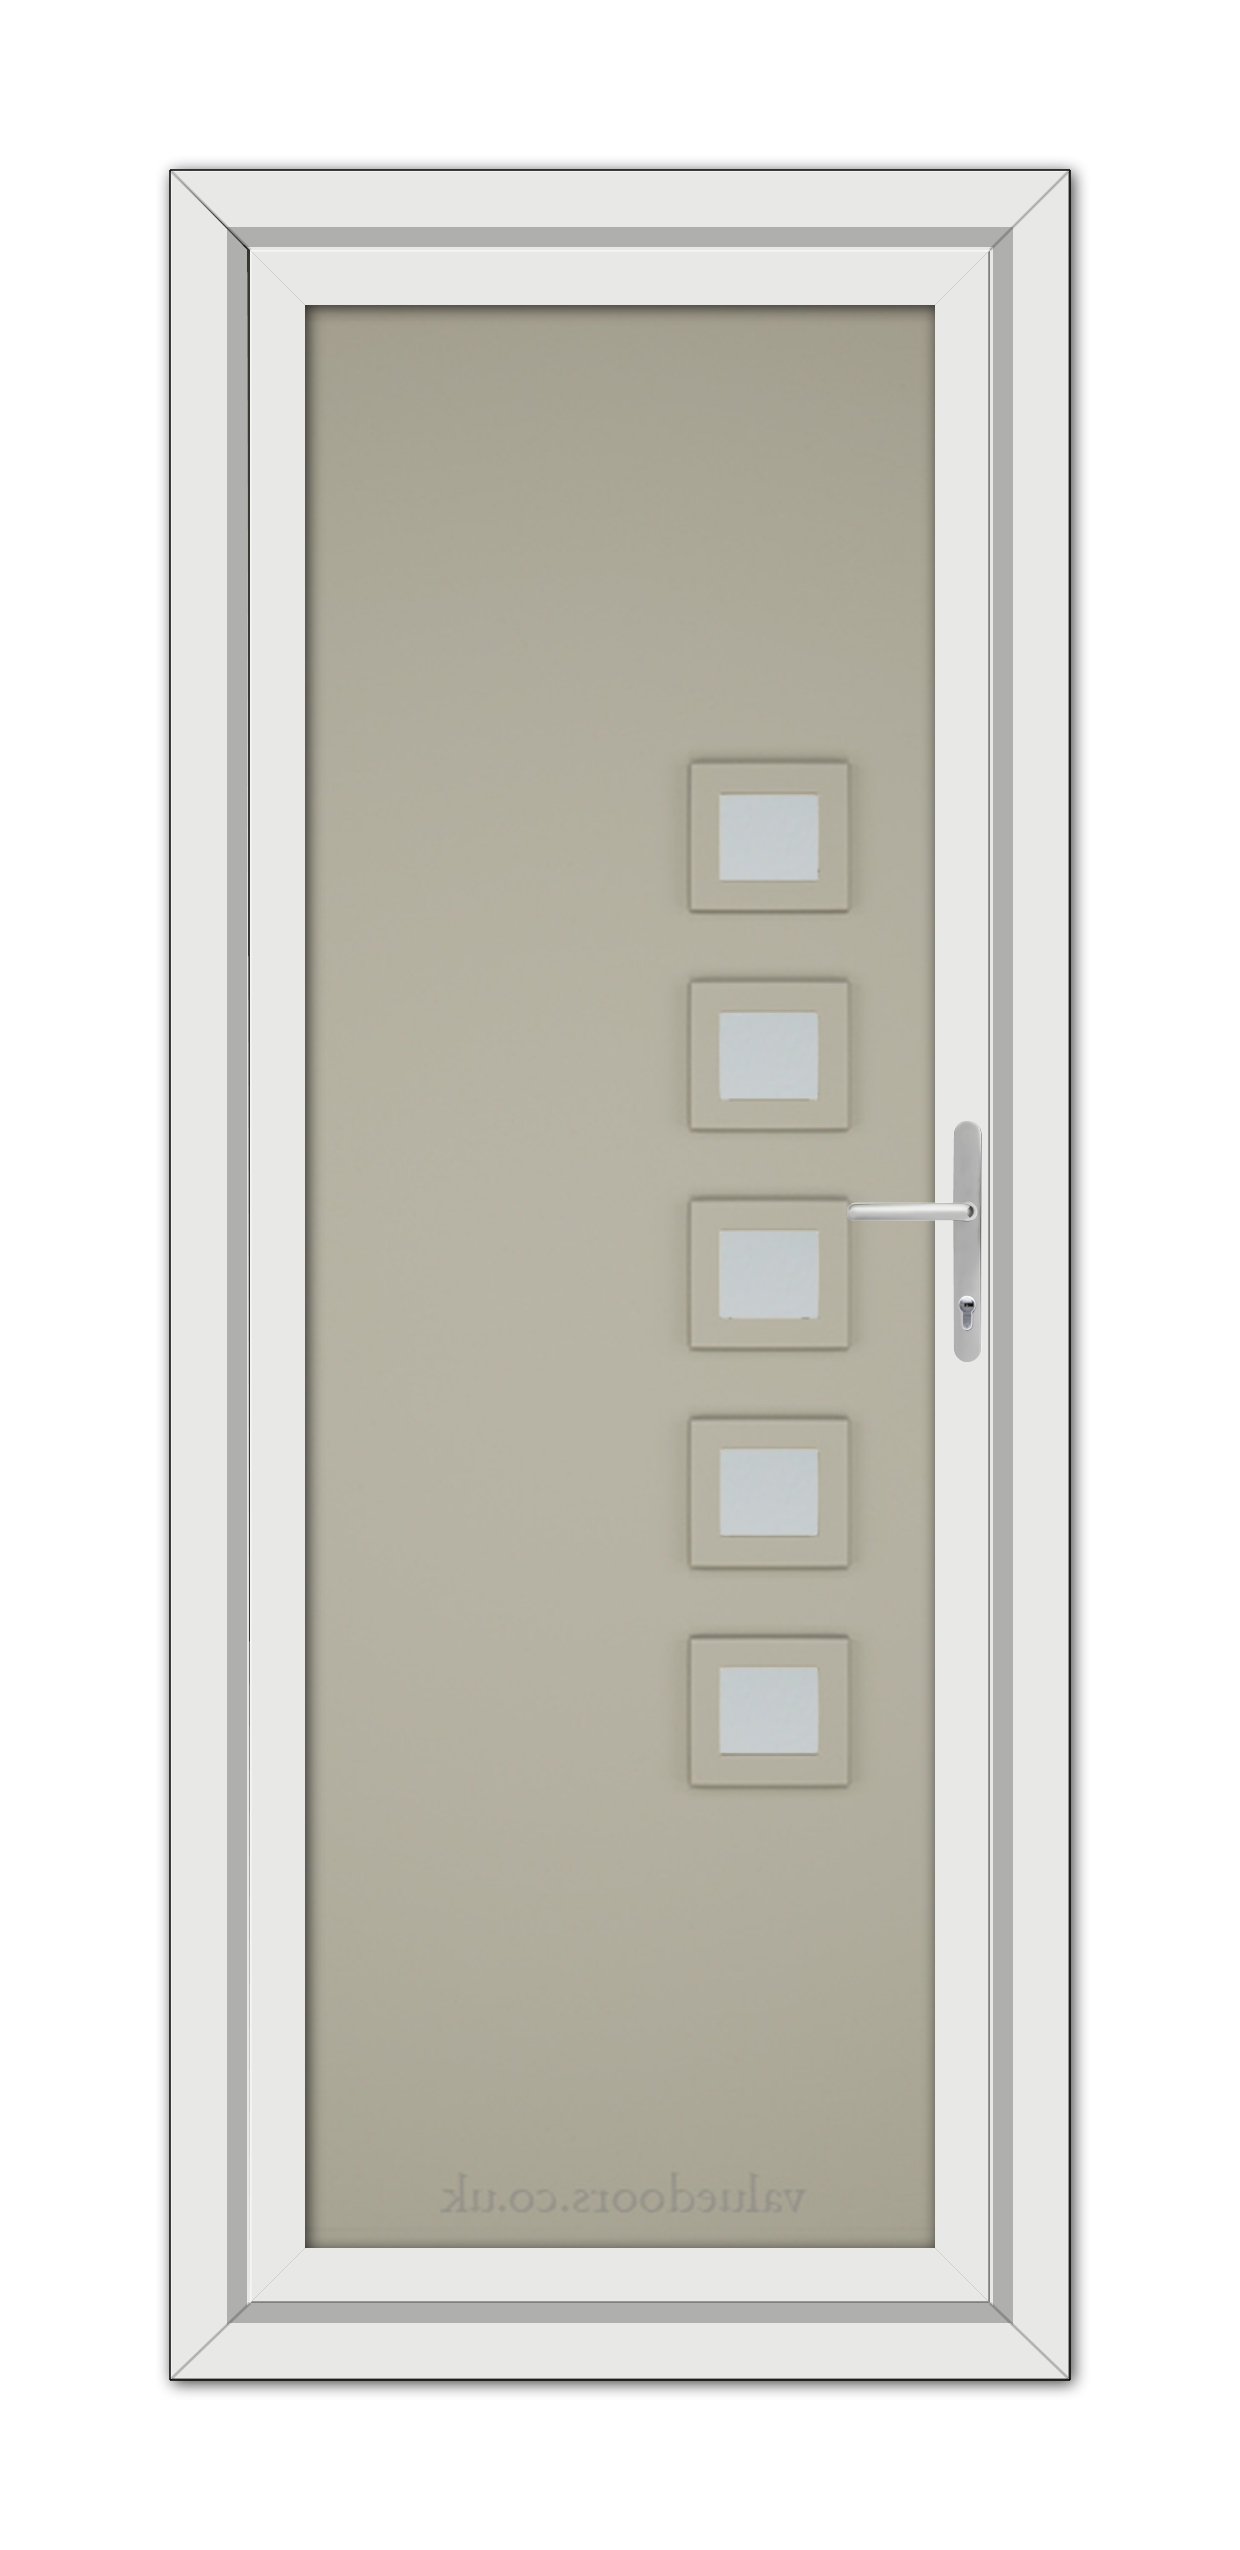 A modern Pebble Grey Malaga uPVC Door featuring a vertical arrangement of five rectangular glass panels on a taupe-colored surface, framed in white, with a metallic handle on the right.